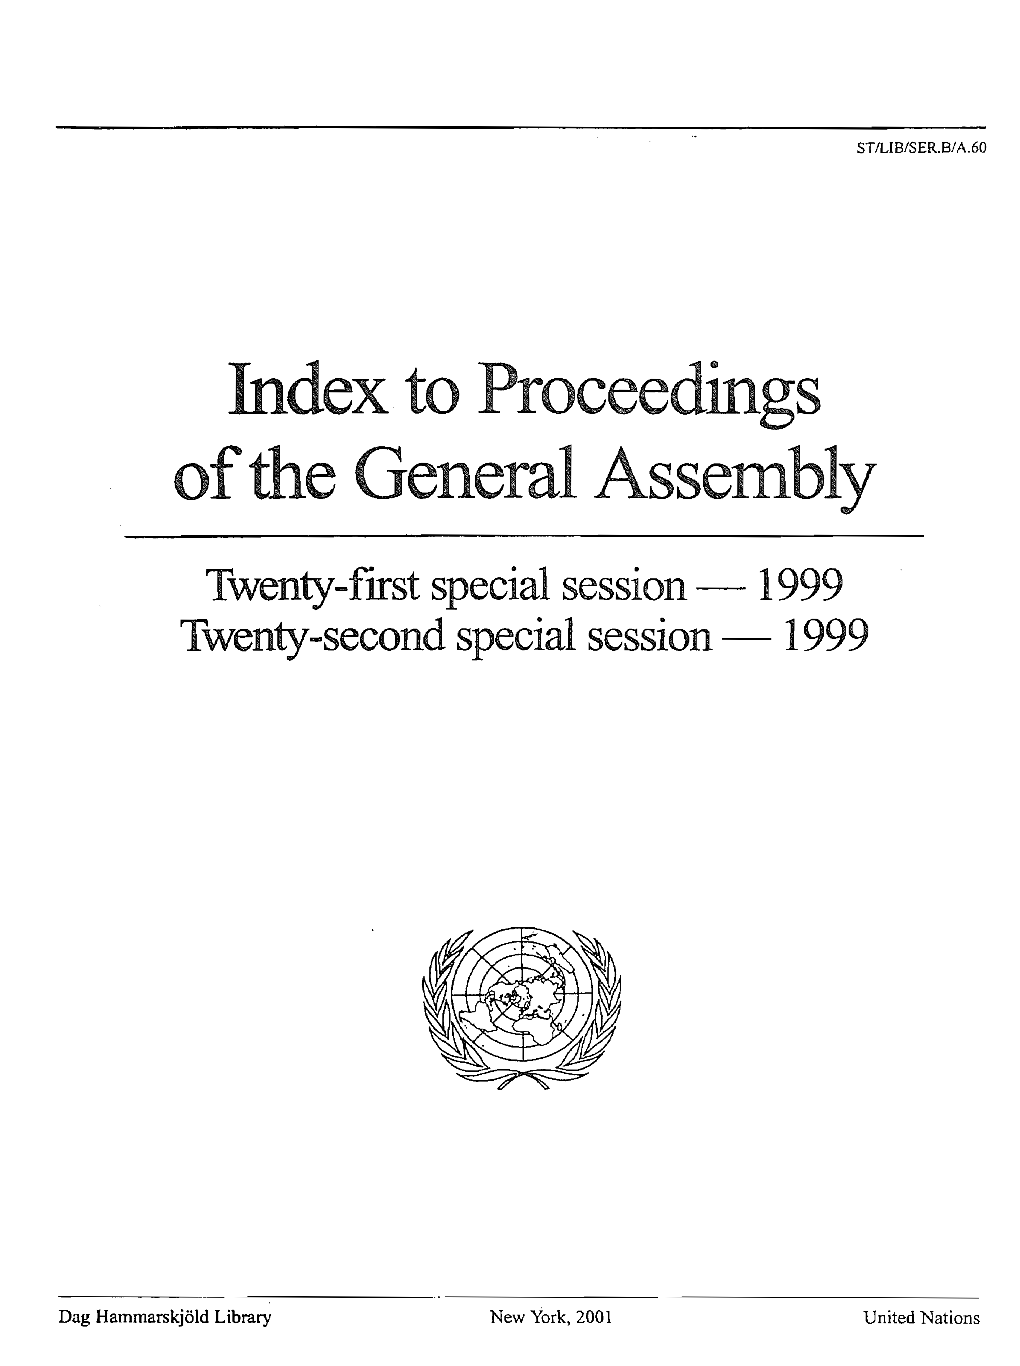 Indexto Proceedings Ofthe General Assembly